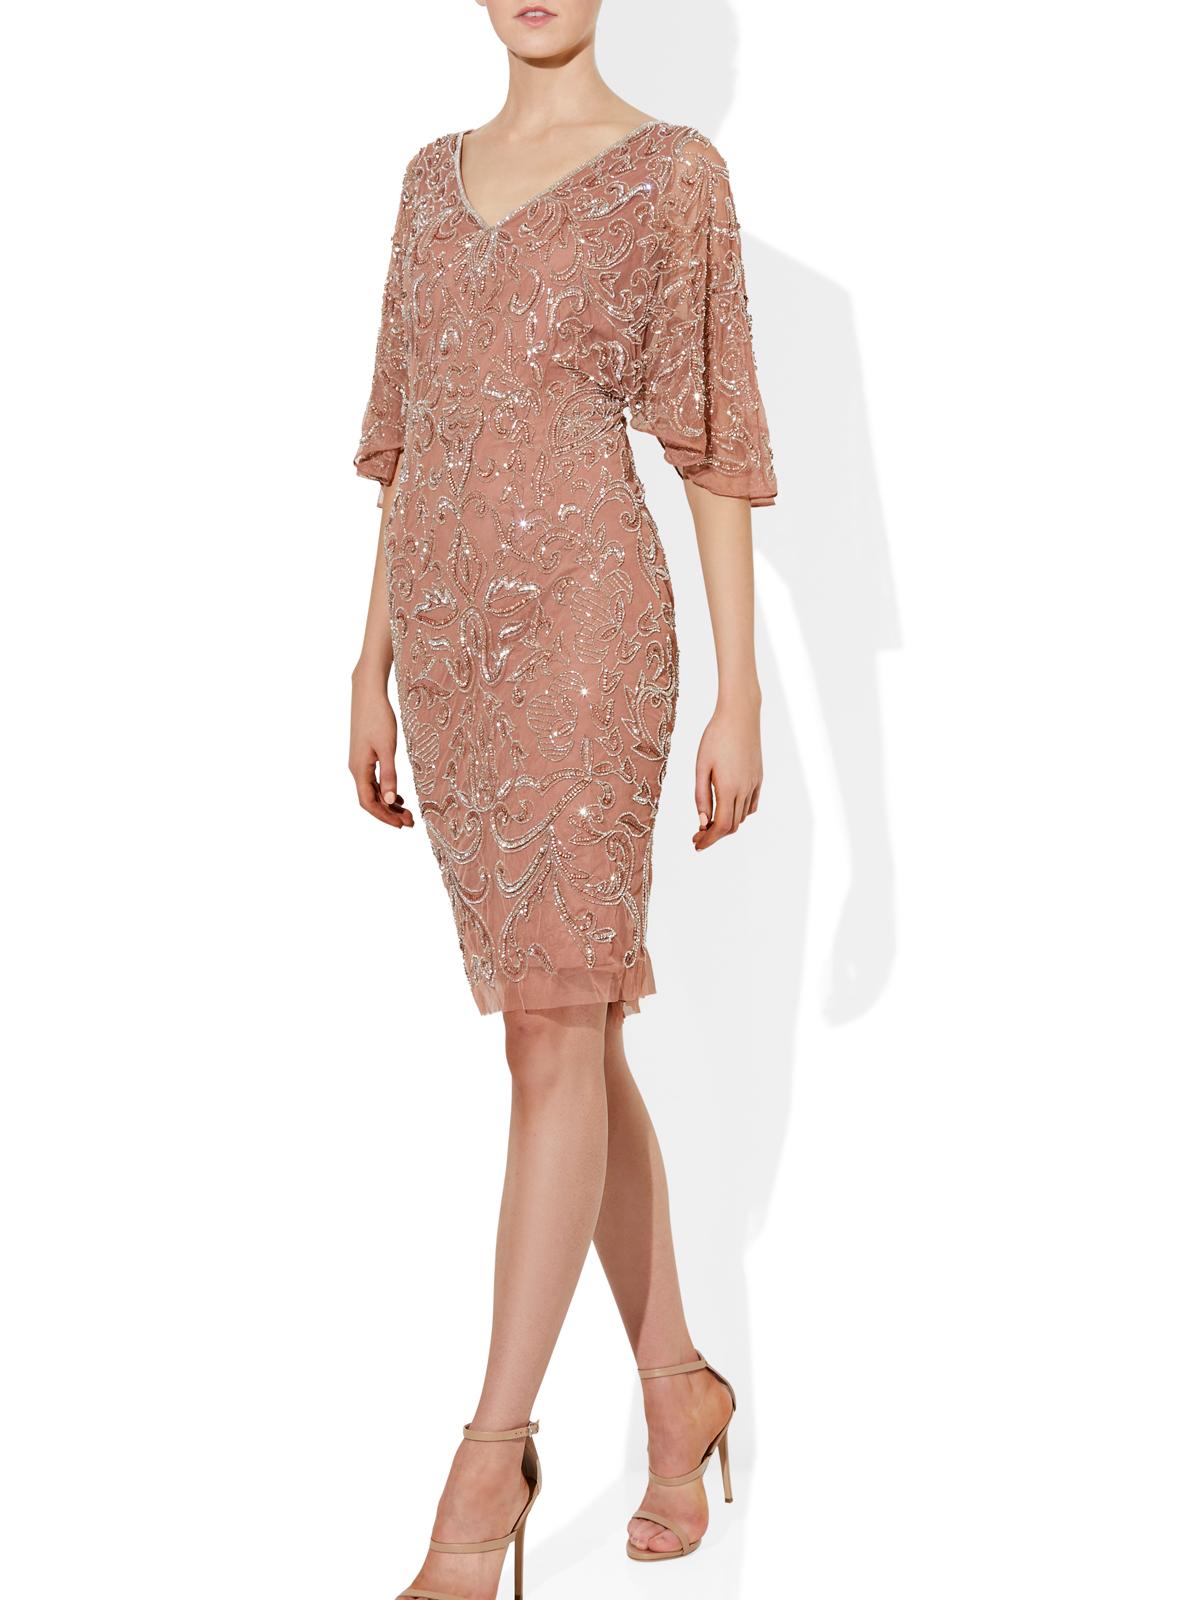 Odette Beaded Cocktail Dress by Montique